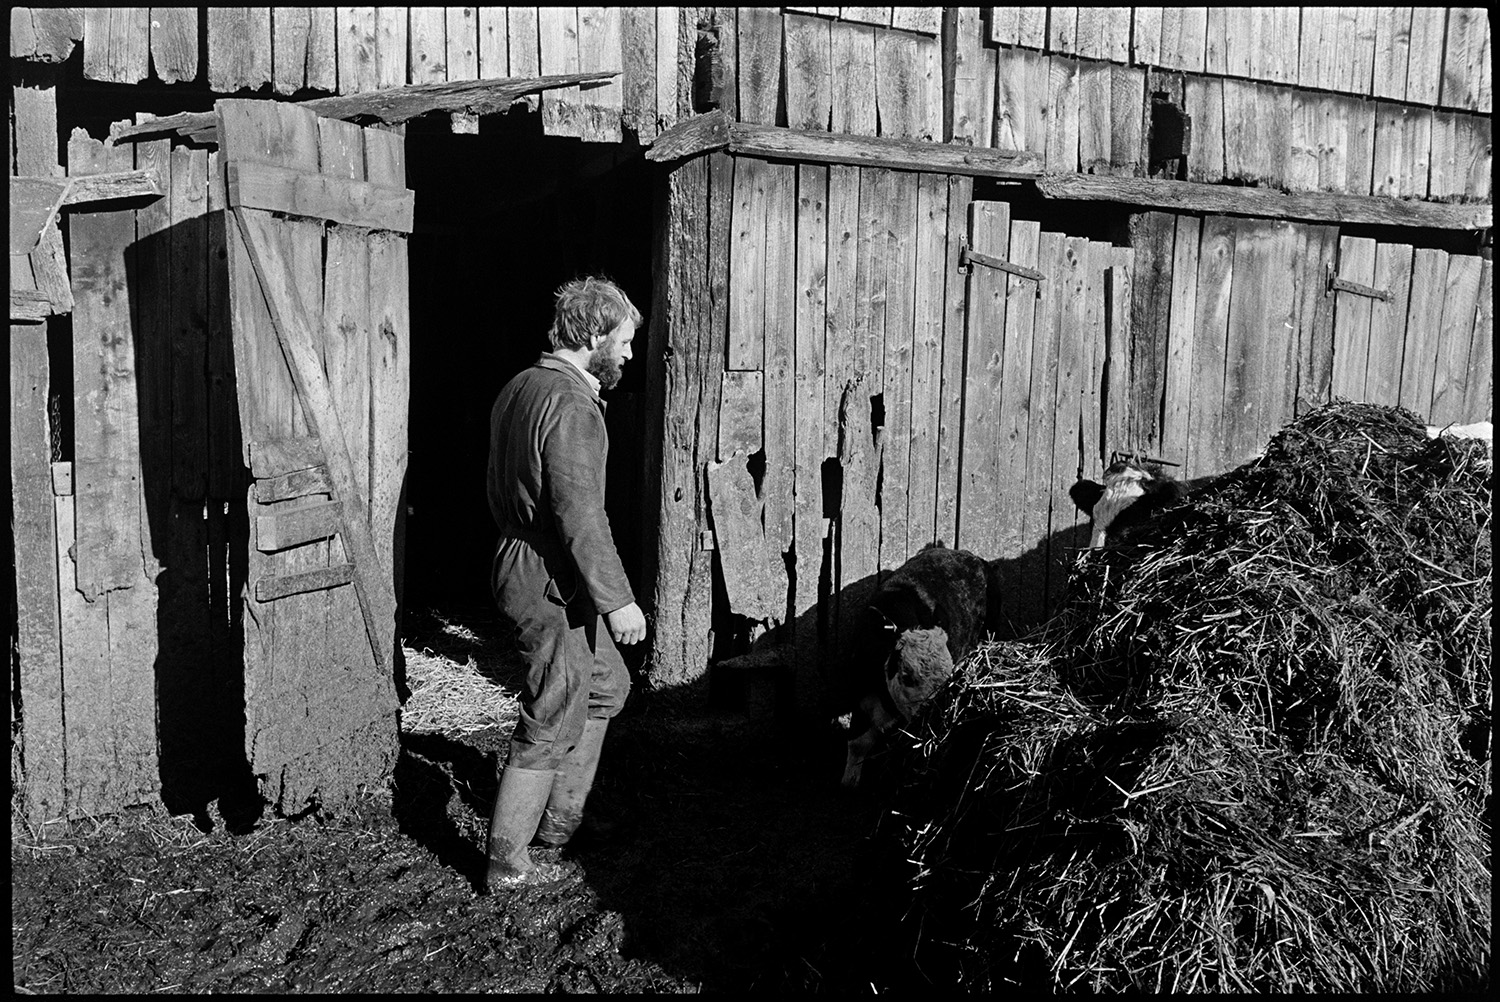 Farm with barns, farmer bringing in cows to feed calves through yard with muckheaps, manure.
[Man standing next to a heap of manure outside the entrance to a wooden barn at The Barton, Burrington. He is looking at two calves behind the muckheap.]